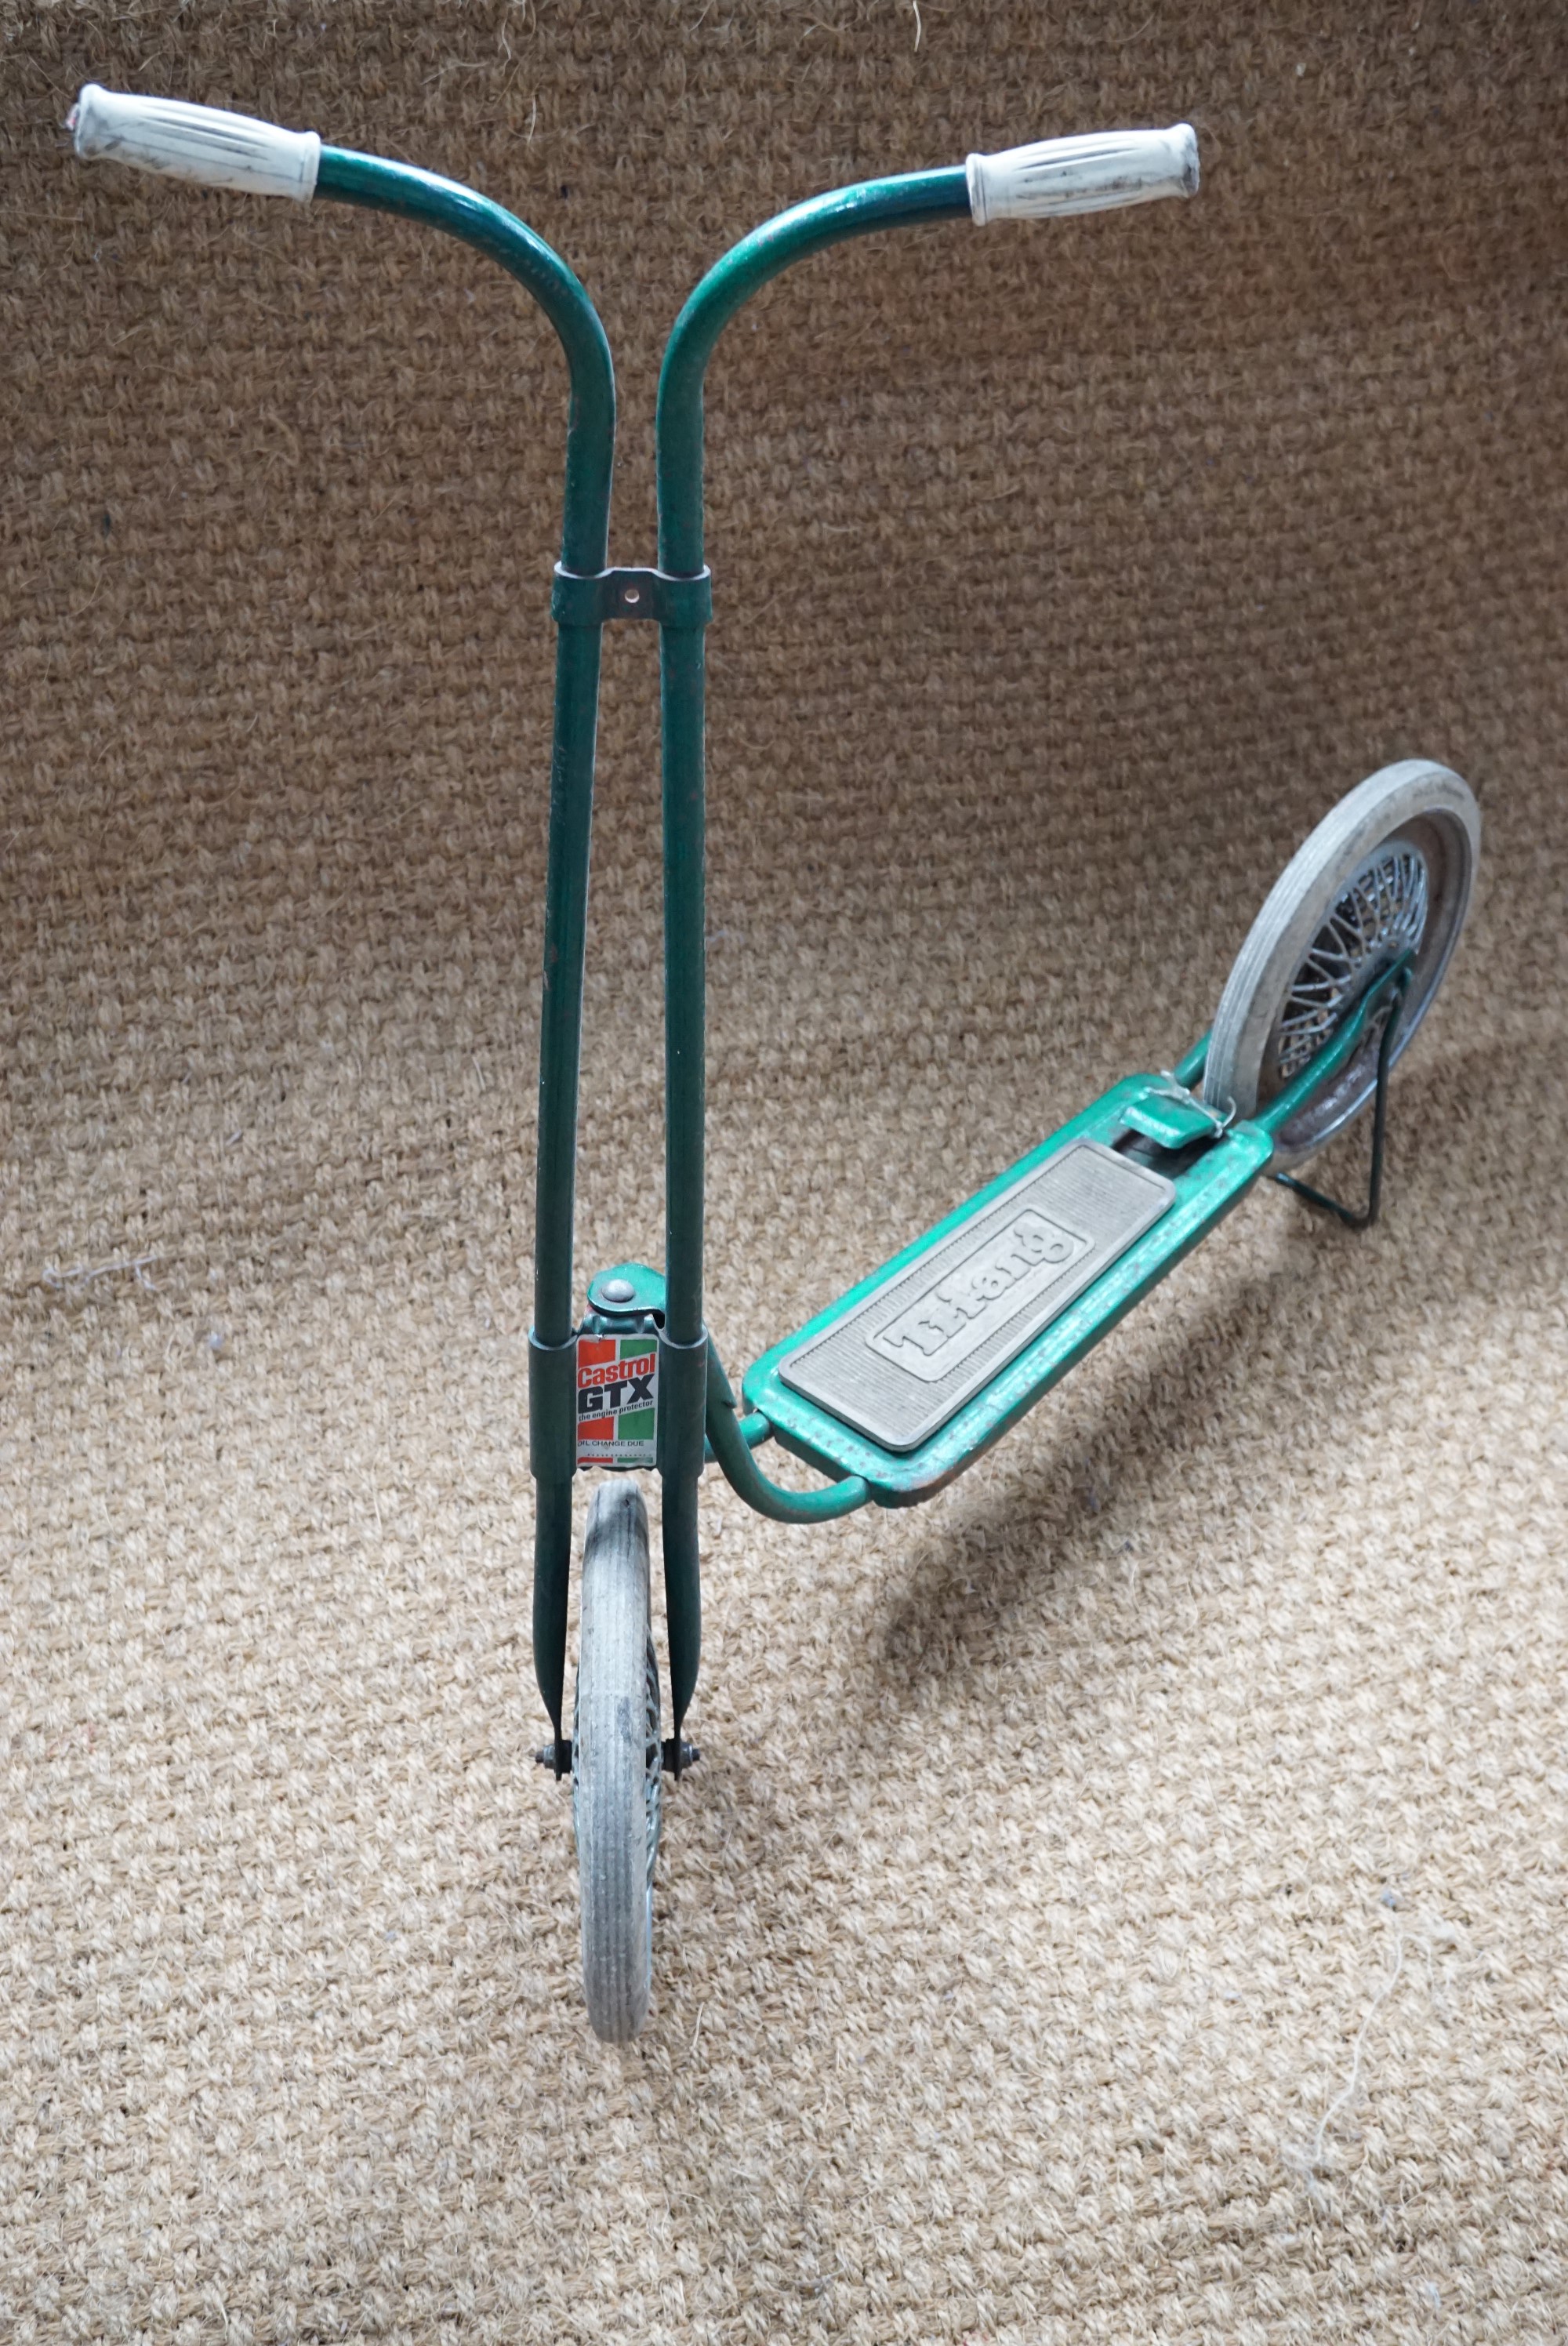 A Triang scooter